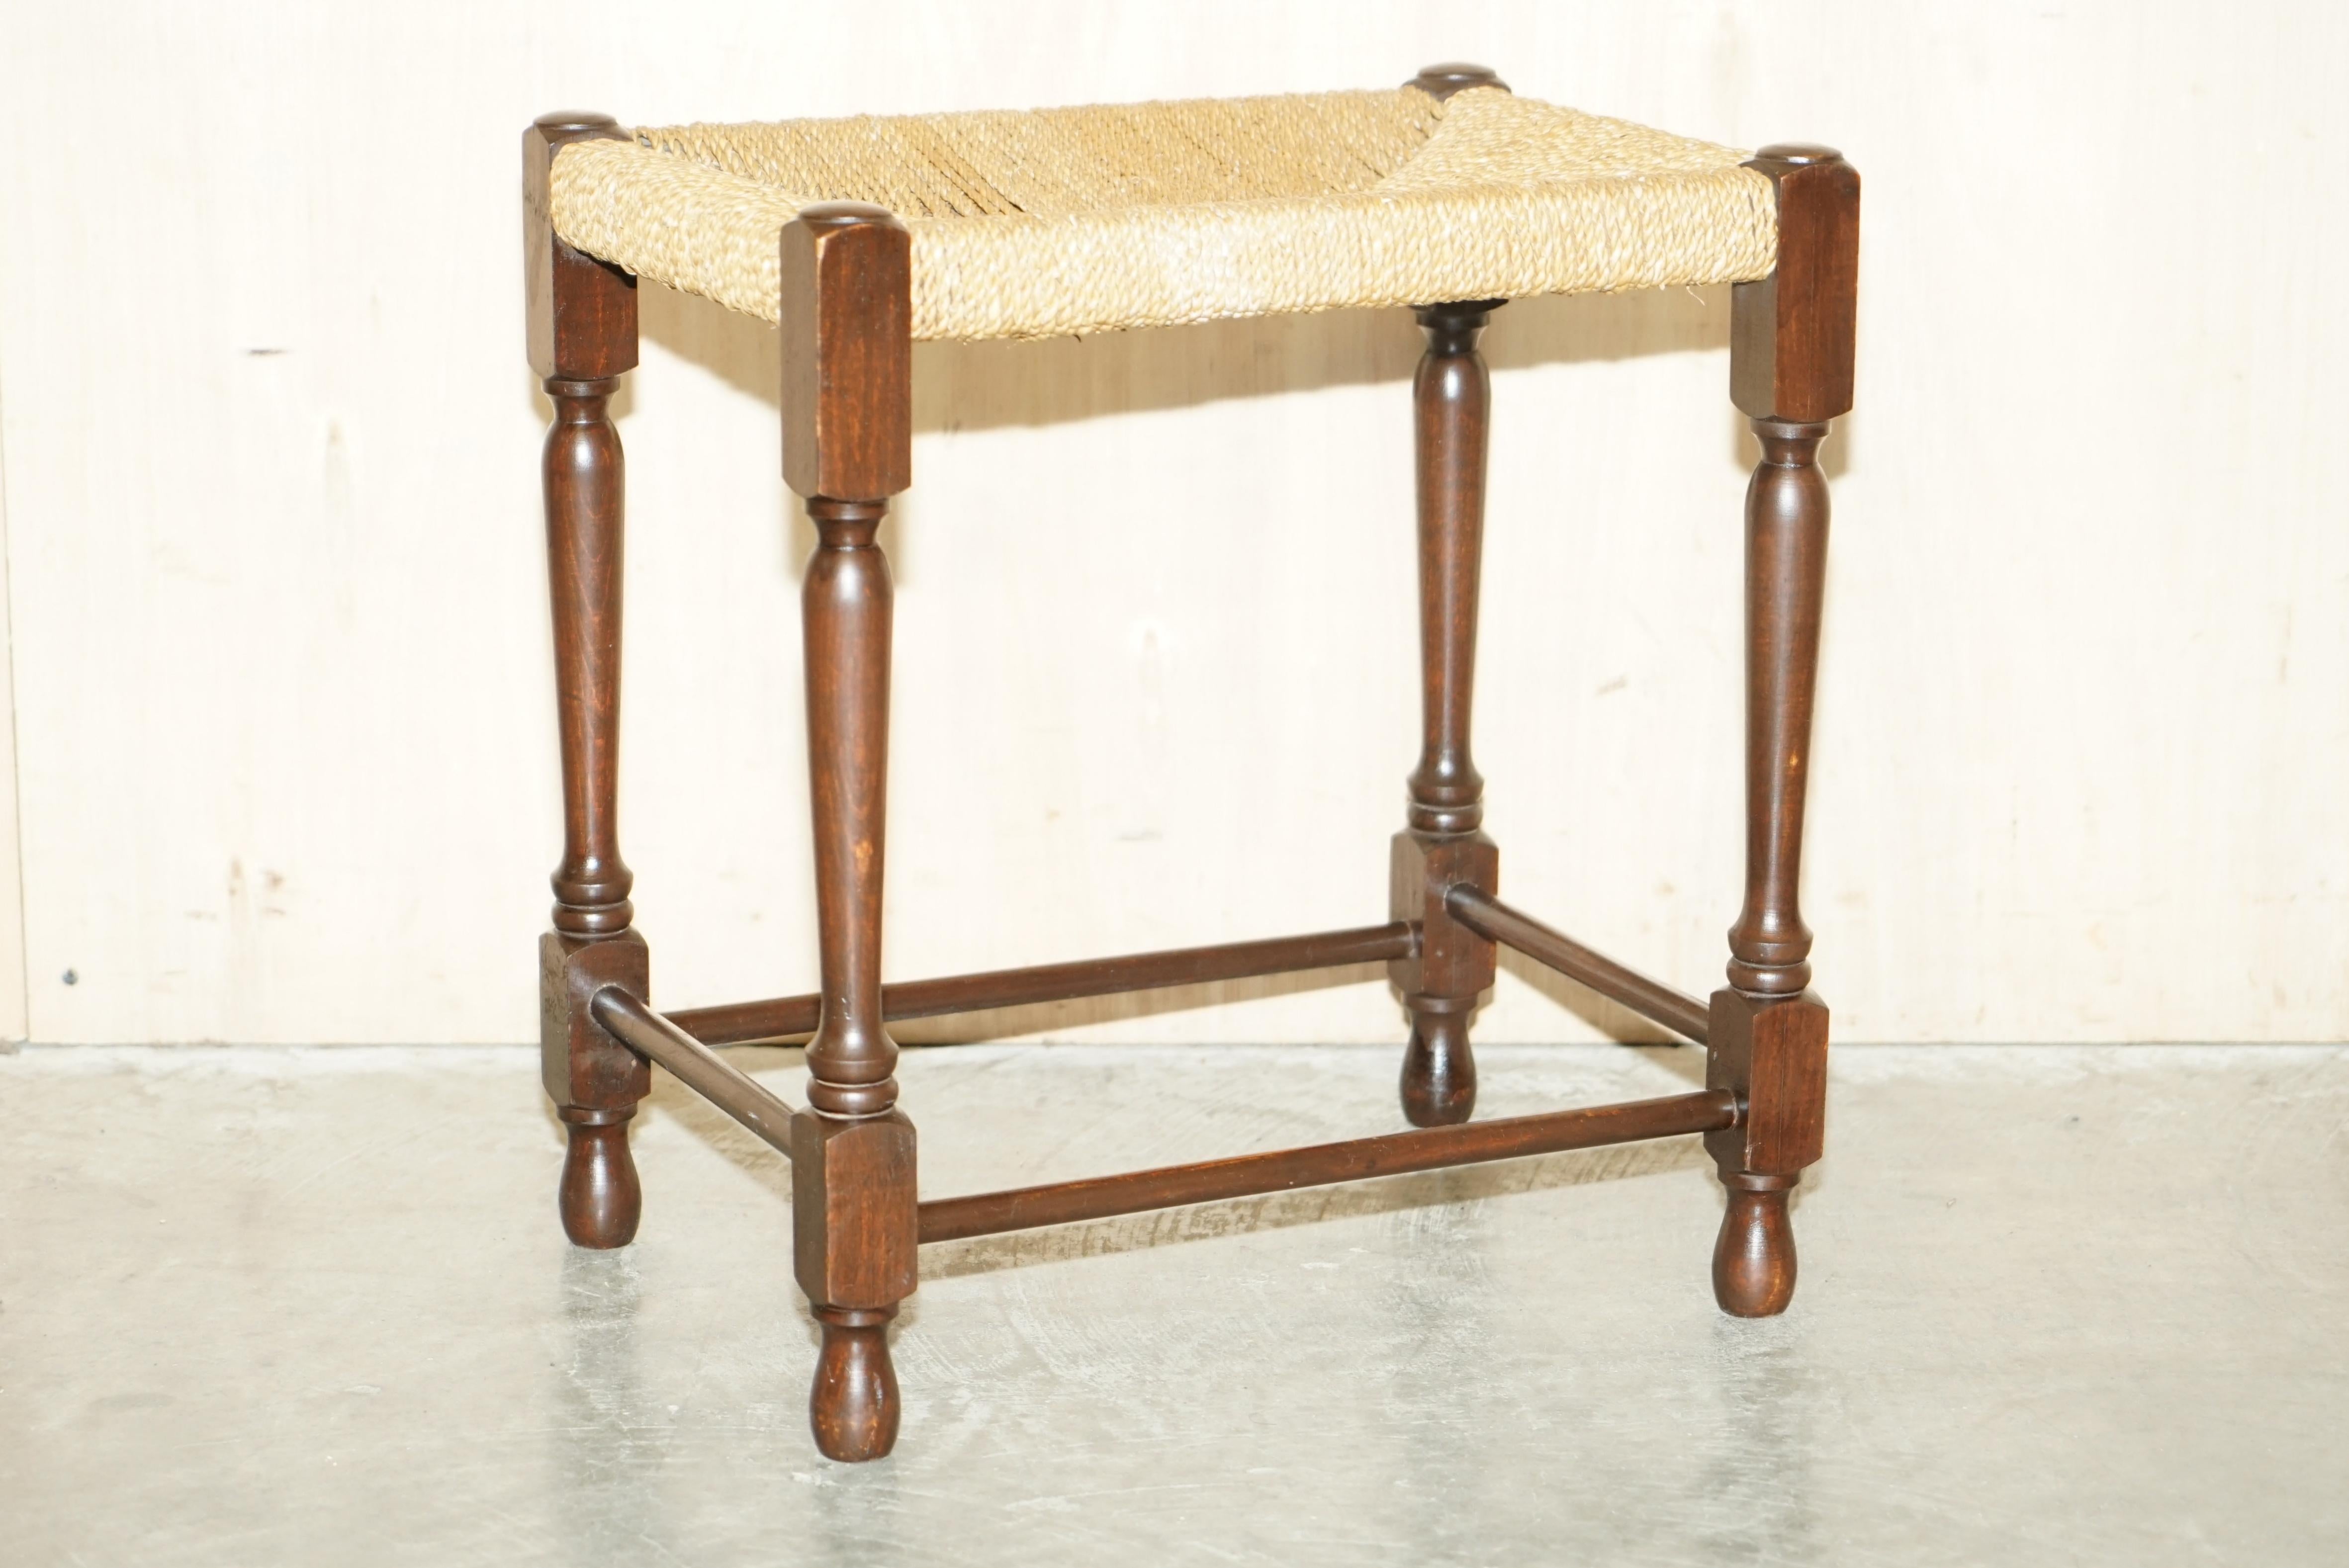 We are delighted to offer for sale this lovely original circa 1940's Dutch Beech wood stool with rope twist rush style seat

A very decorative and well made piece, these stools are super popular in the dining chair range, they have been in